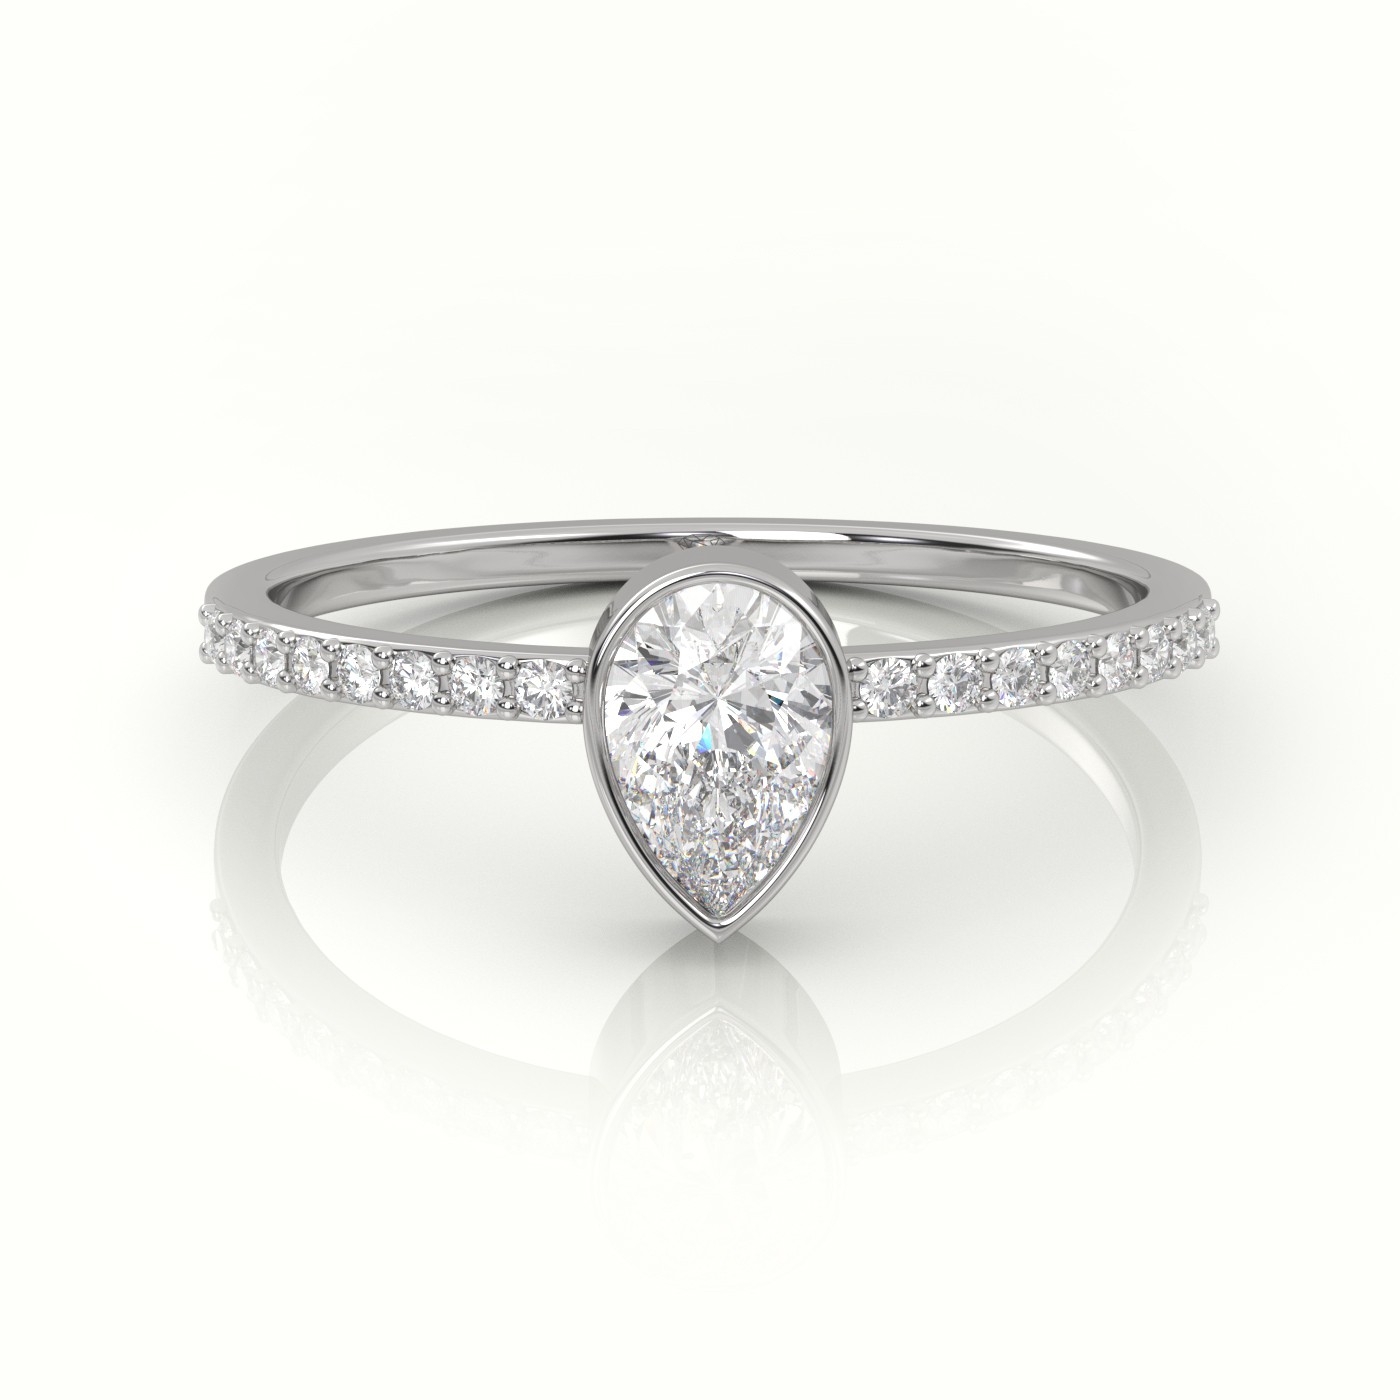 18K WHITE GOLD PEAR CUT DIAMOND CHANNEL SETTING ENGAGEMENT RING